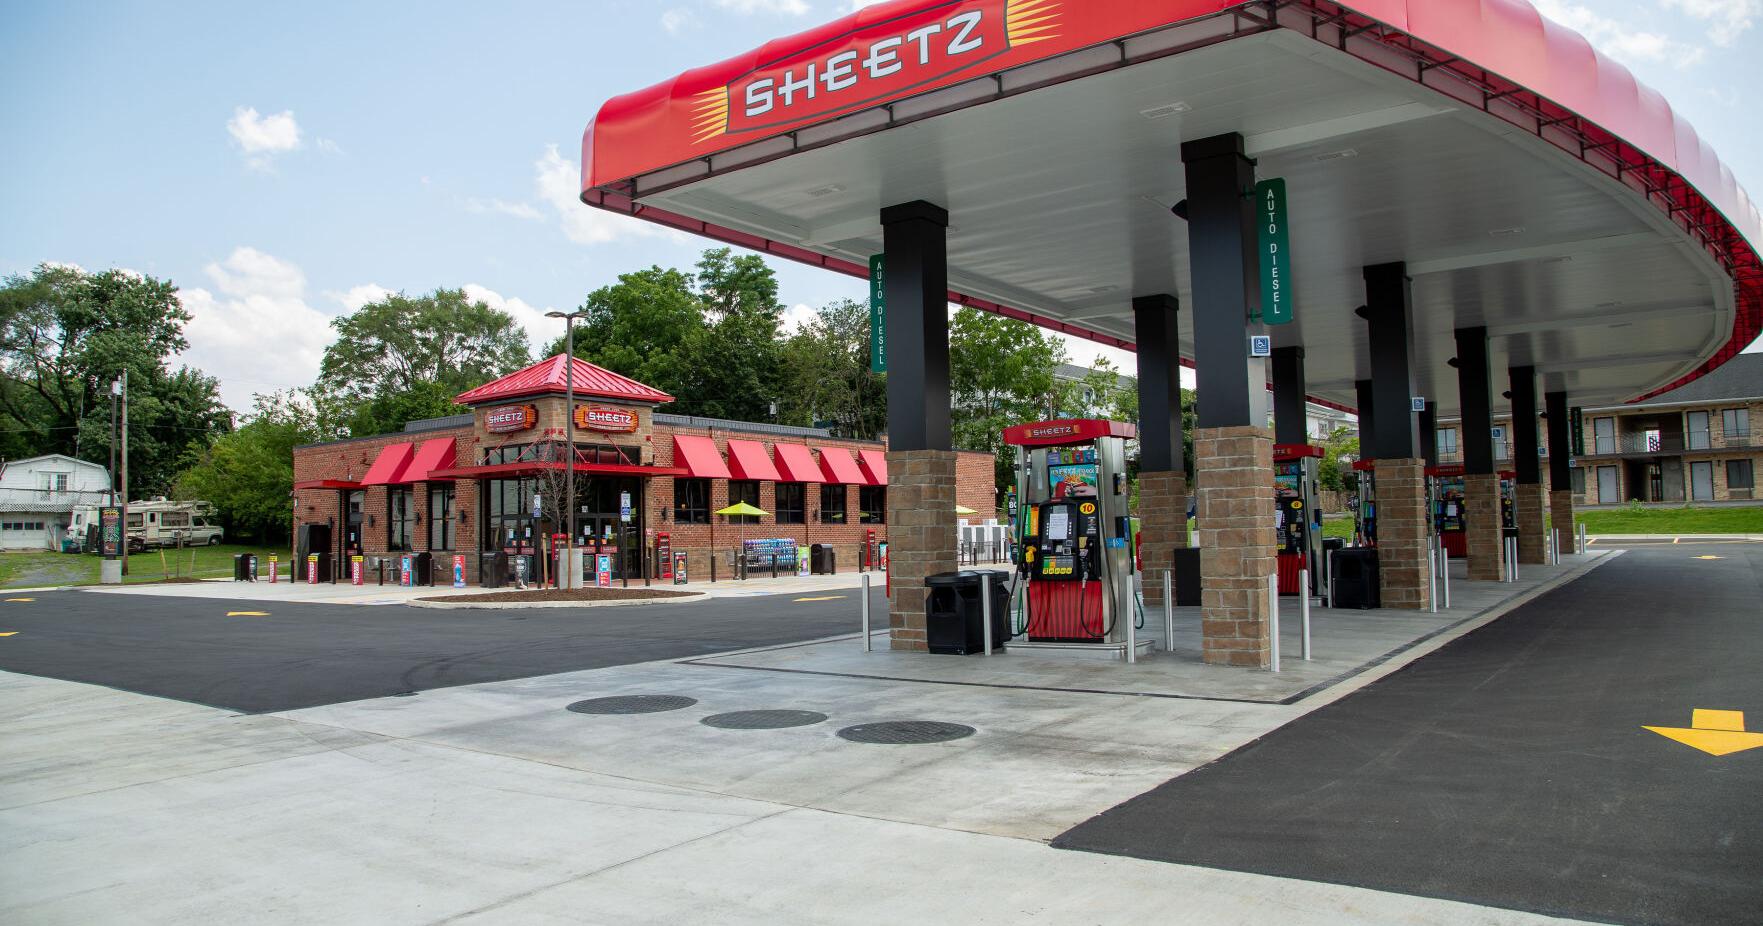 Sheetz lowers the price of Unleaded 88 to $1.99 this week